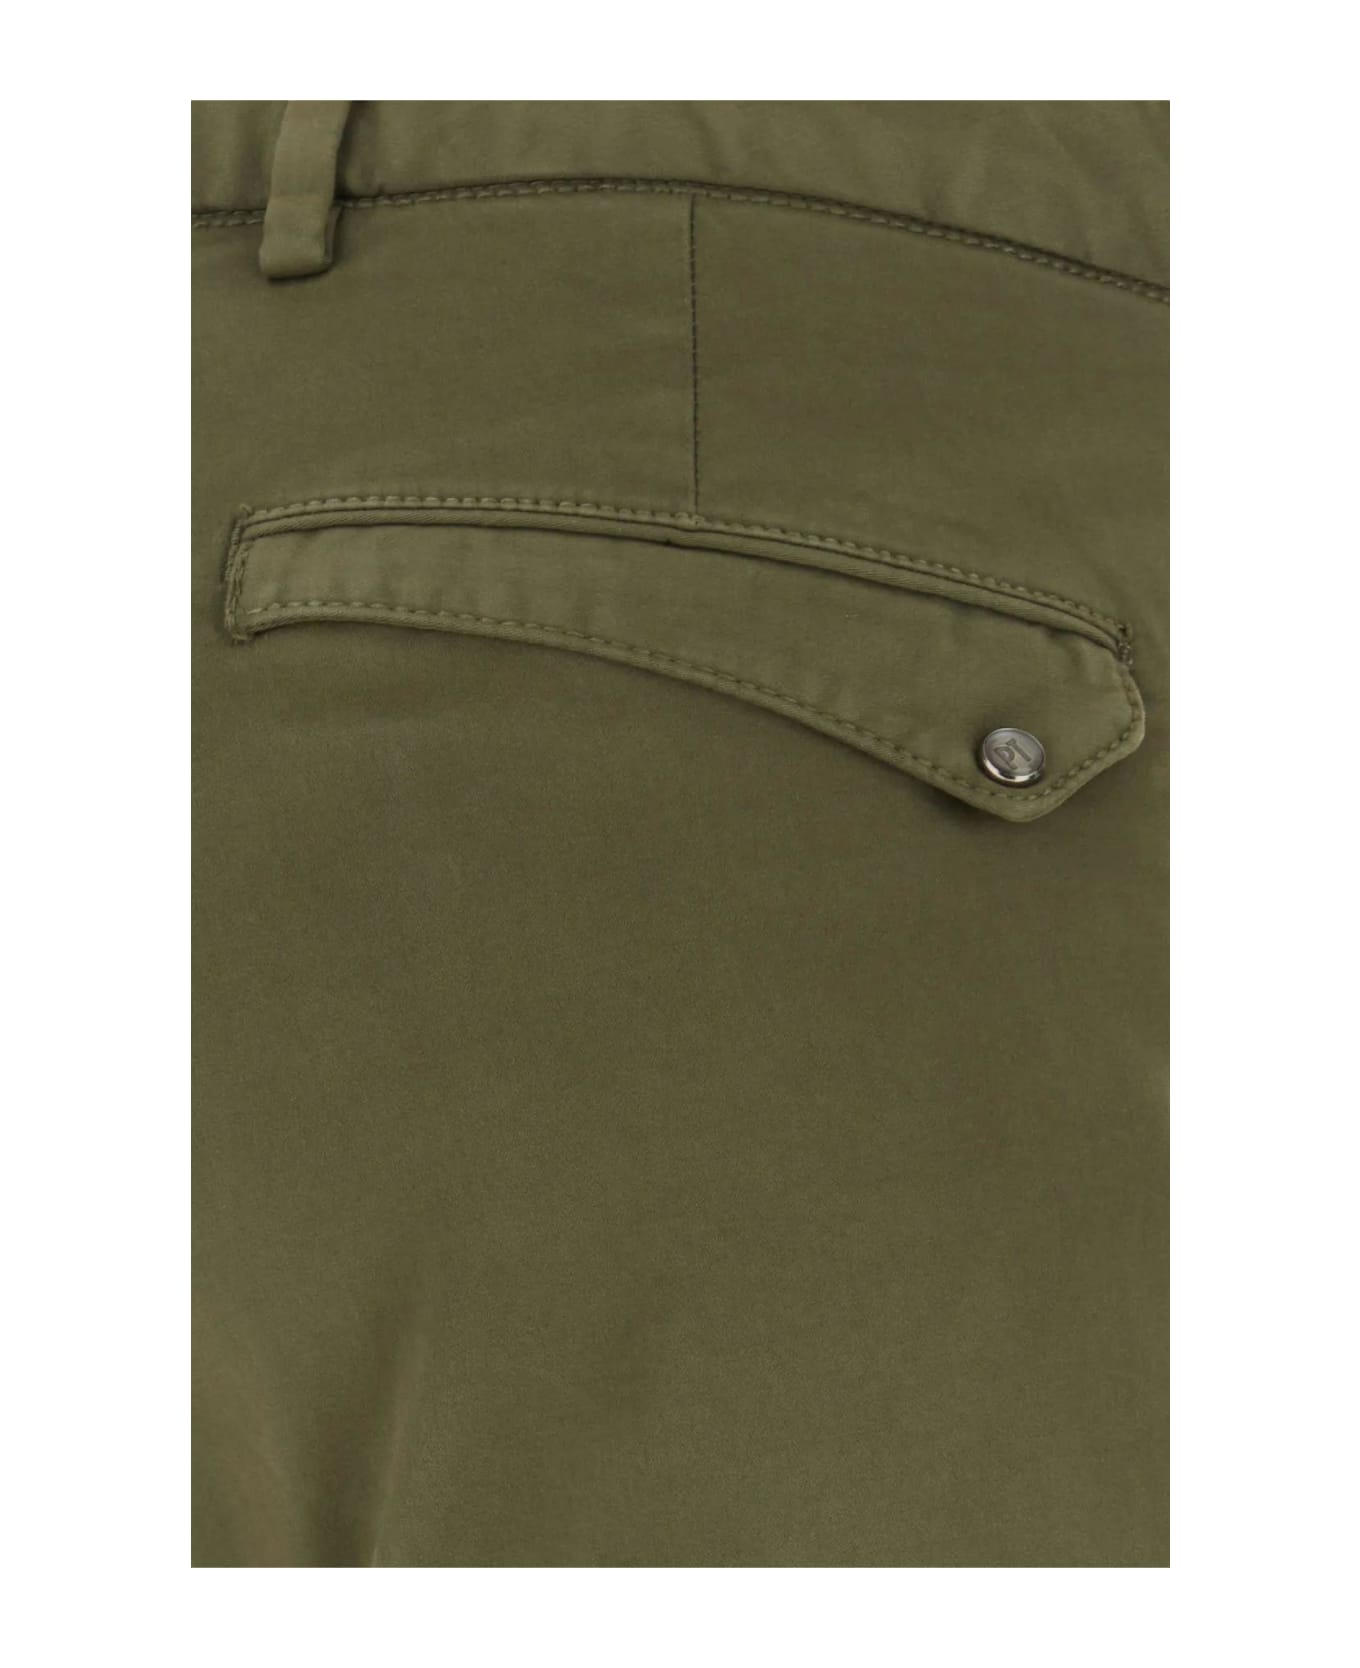 PT Torino Olive Green Stretch Cotton Pant ボトムス